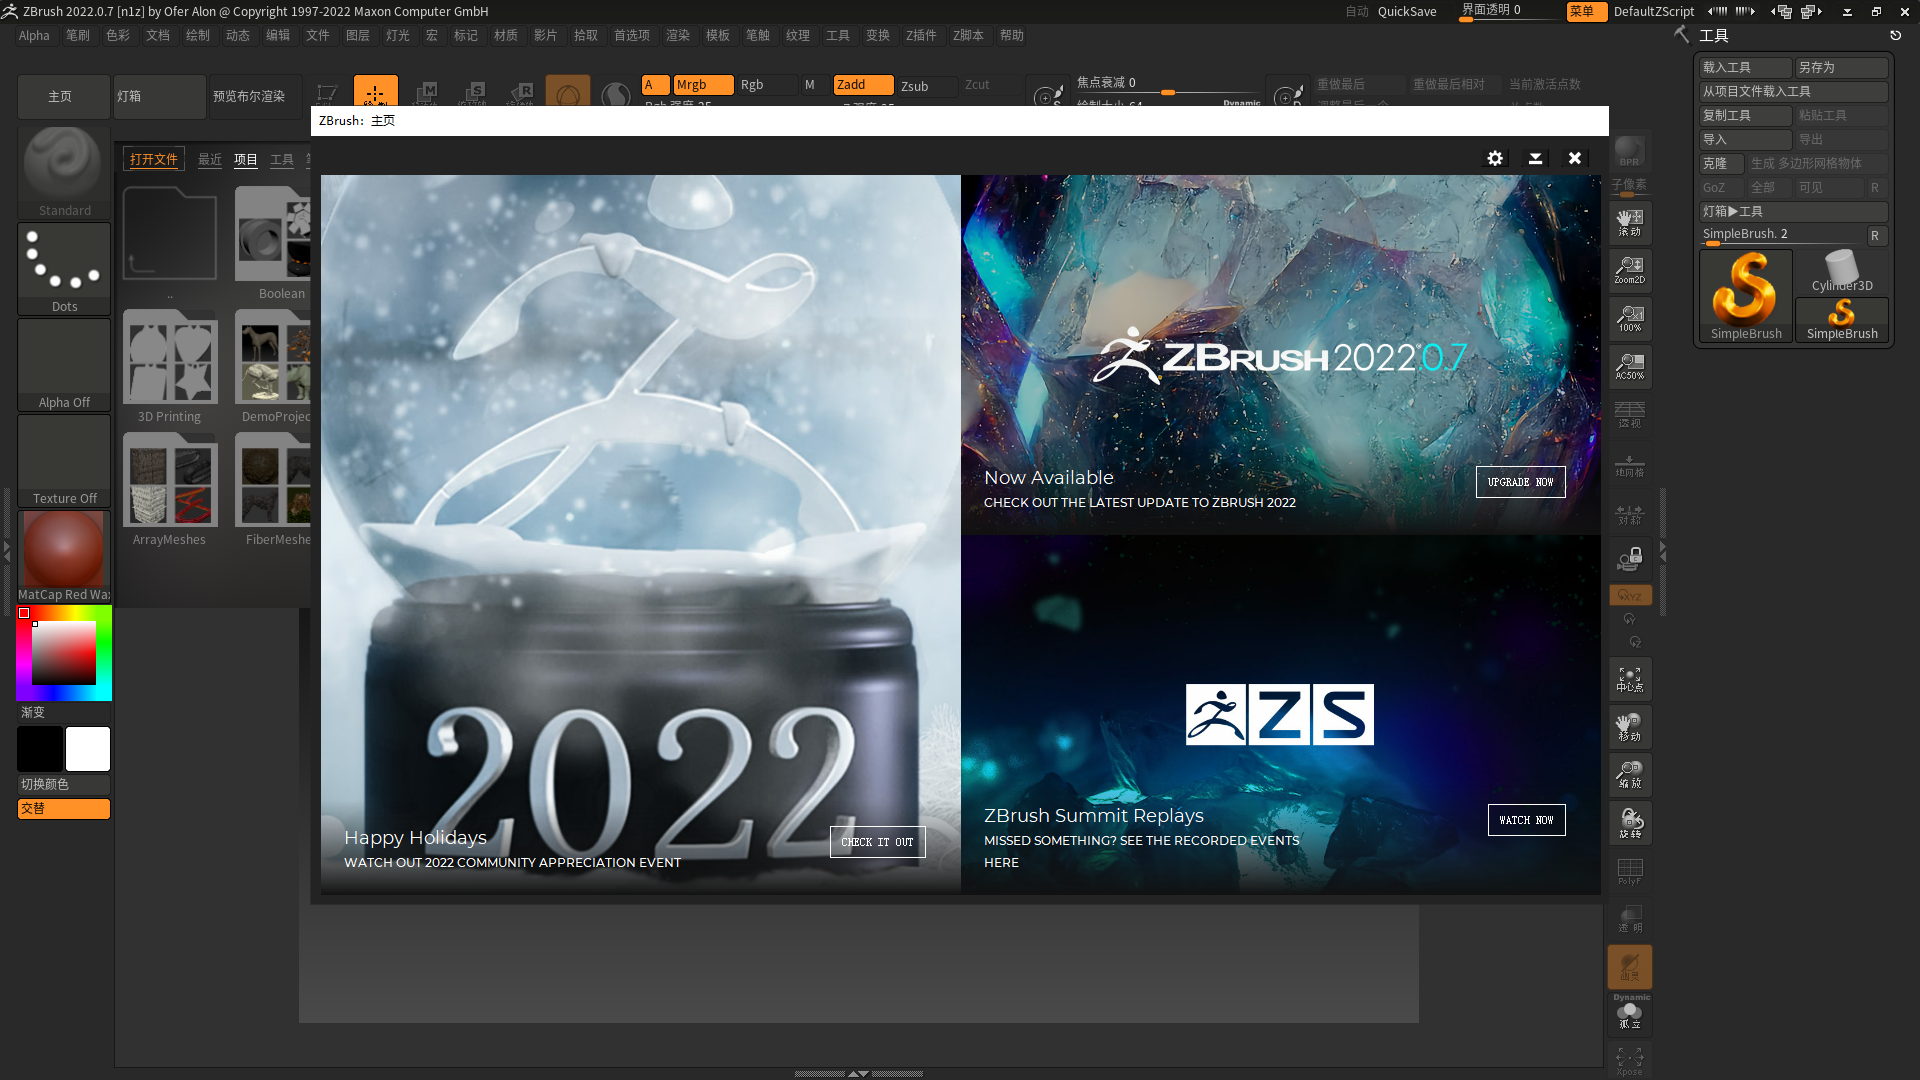 zbrush 2022.0.7 download